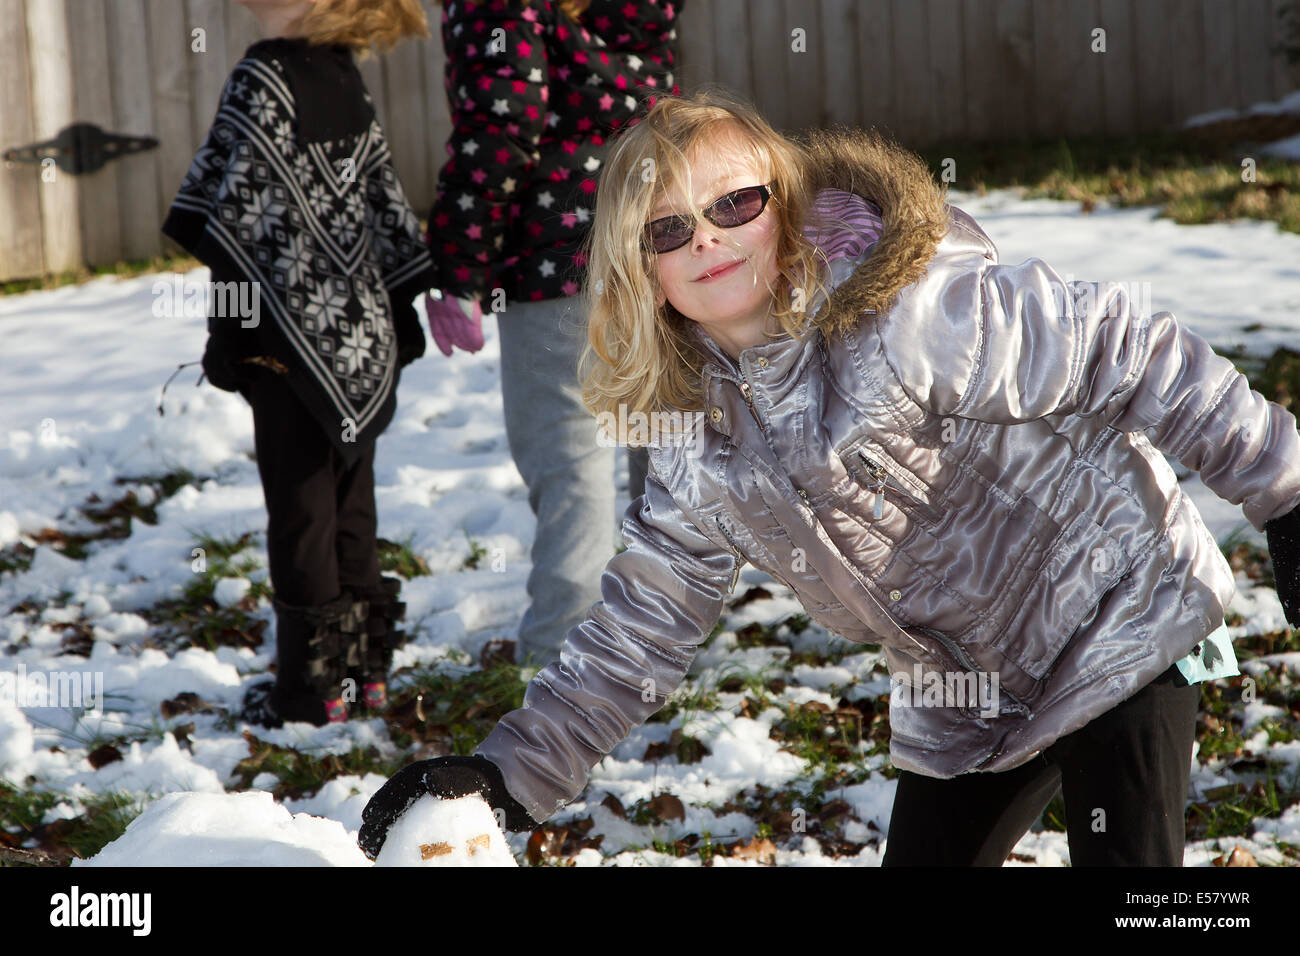 Family snow fun, Young blond girl wearing sunglasses making snowballs. Stock Photo